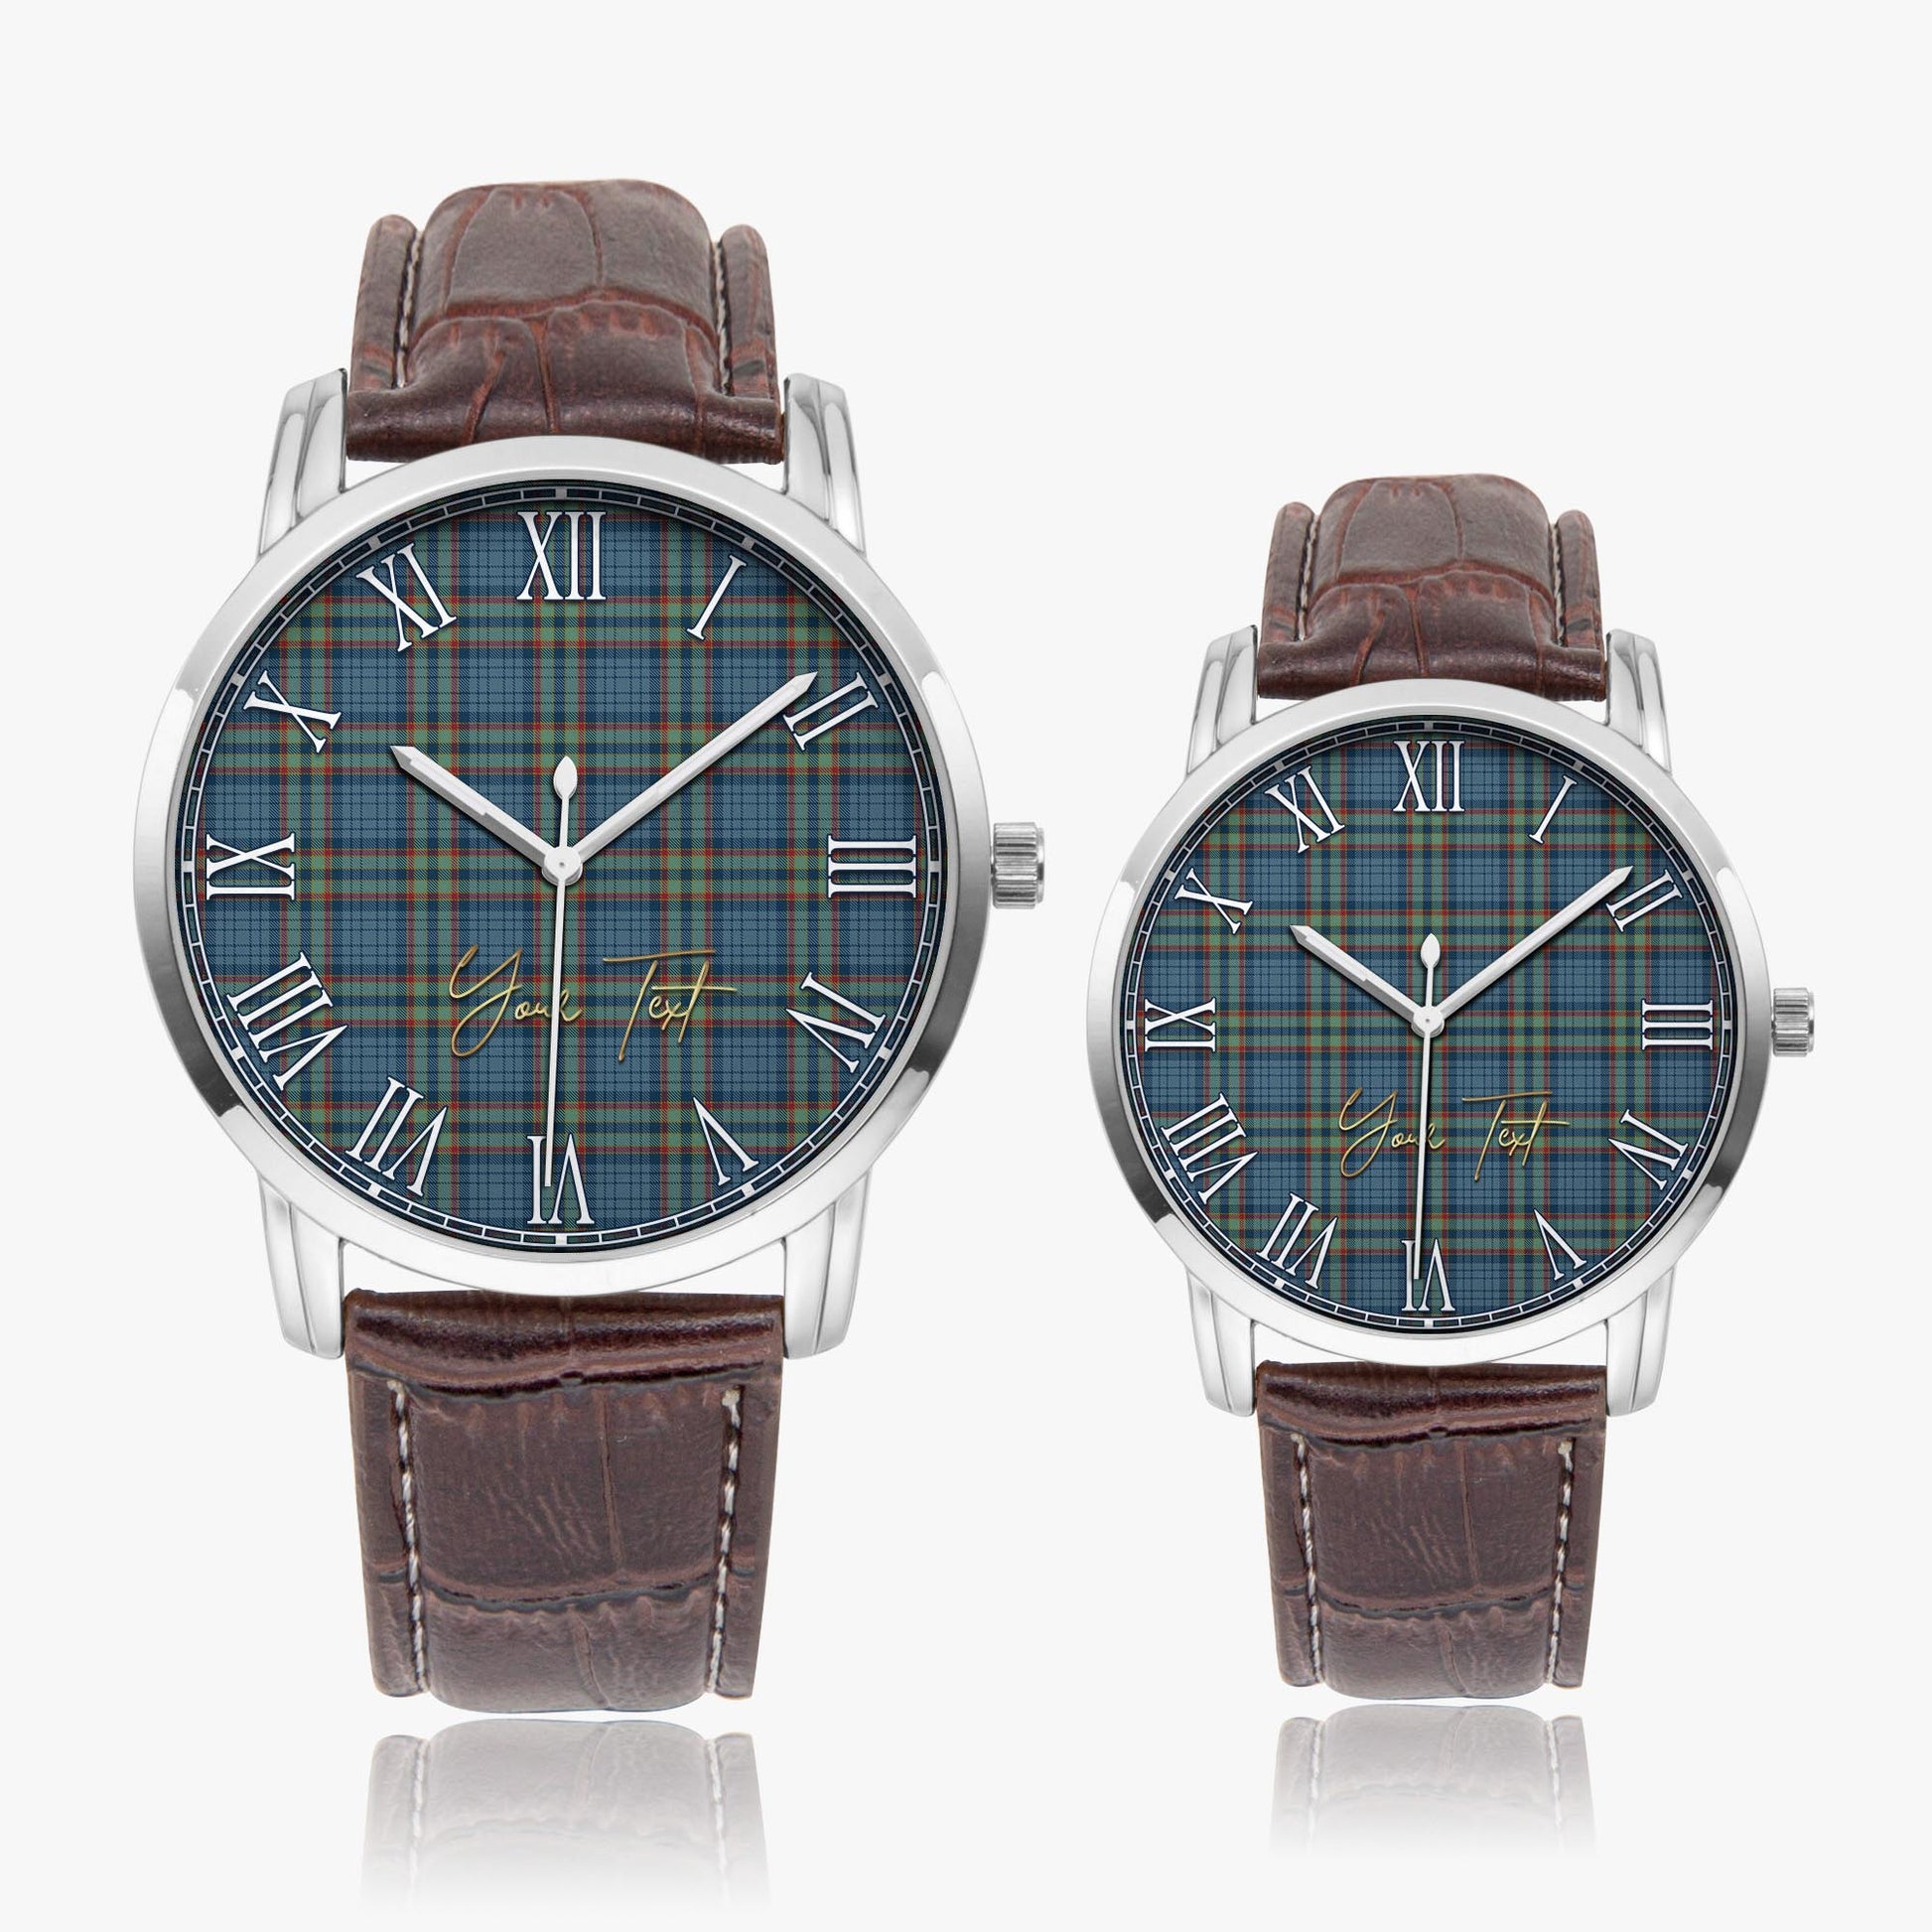 Ralston UK Tartan Personalized Your Text Leather Trap Quartz Watch Wide Type Silver Case With Brown Leather Strap - Tartanvibesclothing